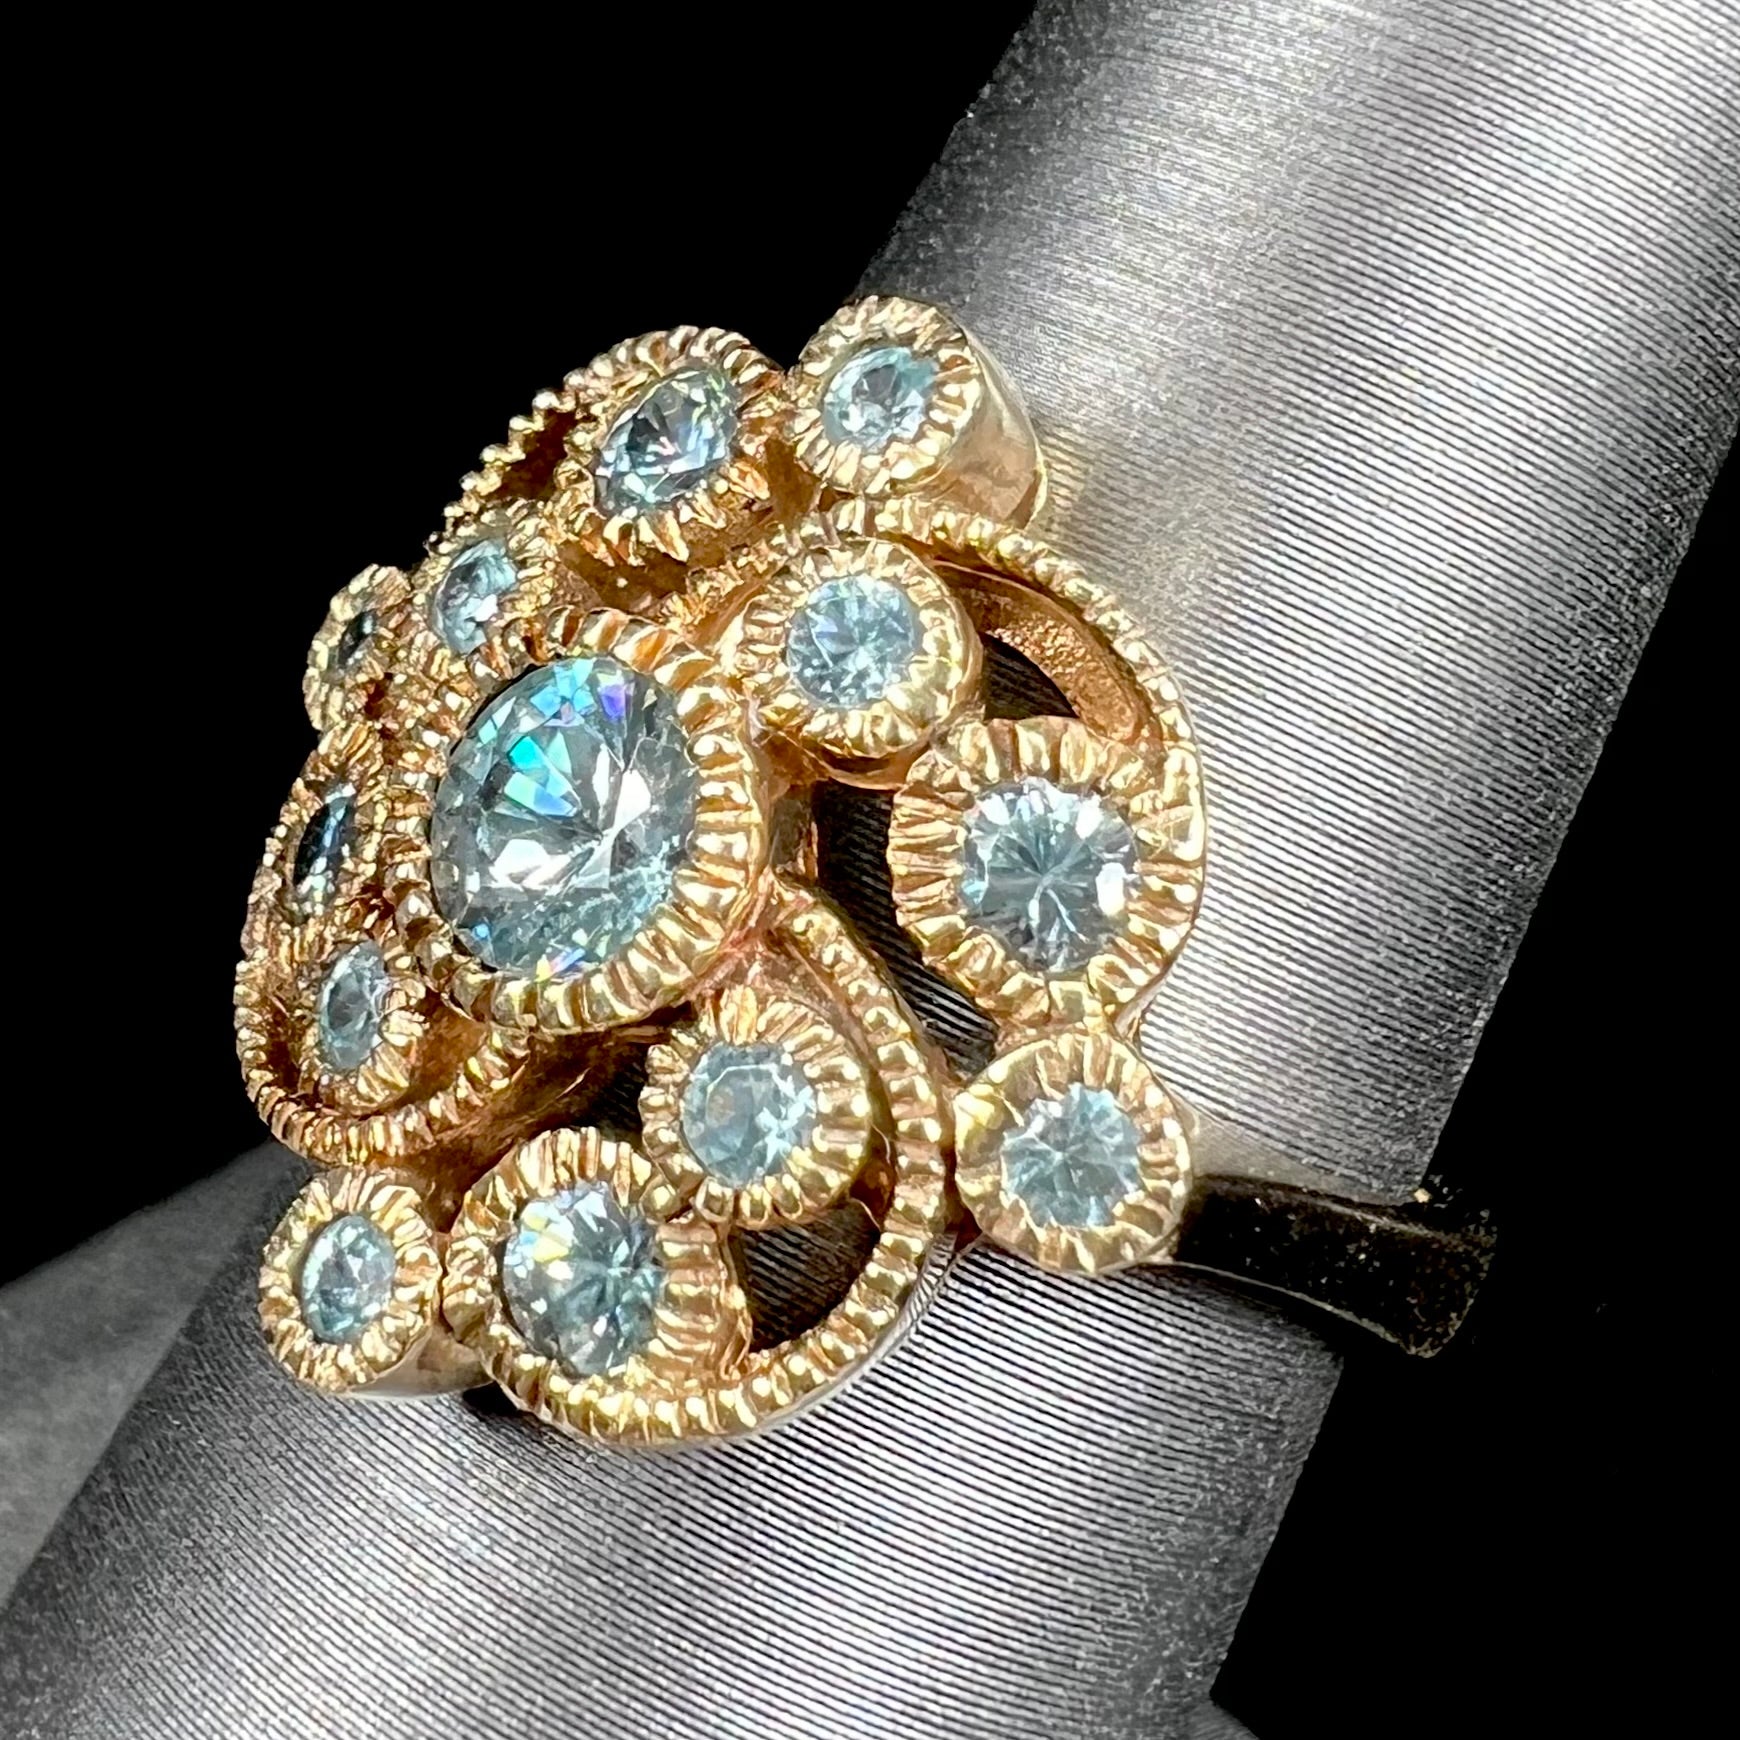 A ladies' yellow gold estate cluster ring set with natural blue zircon stones.